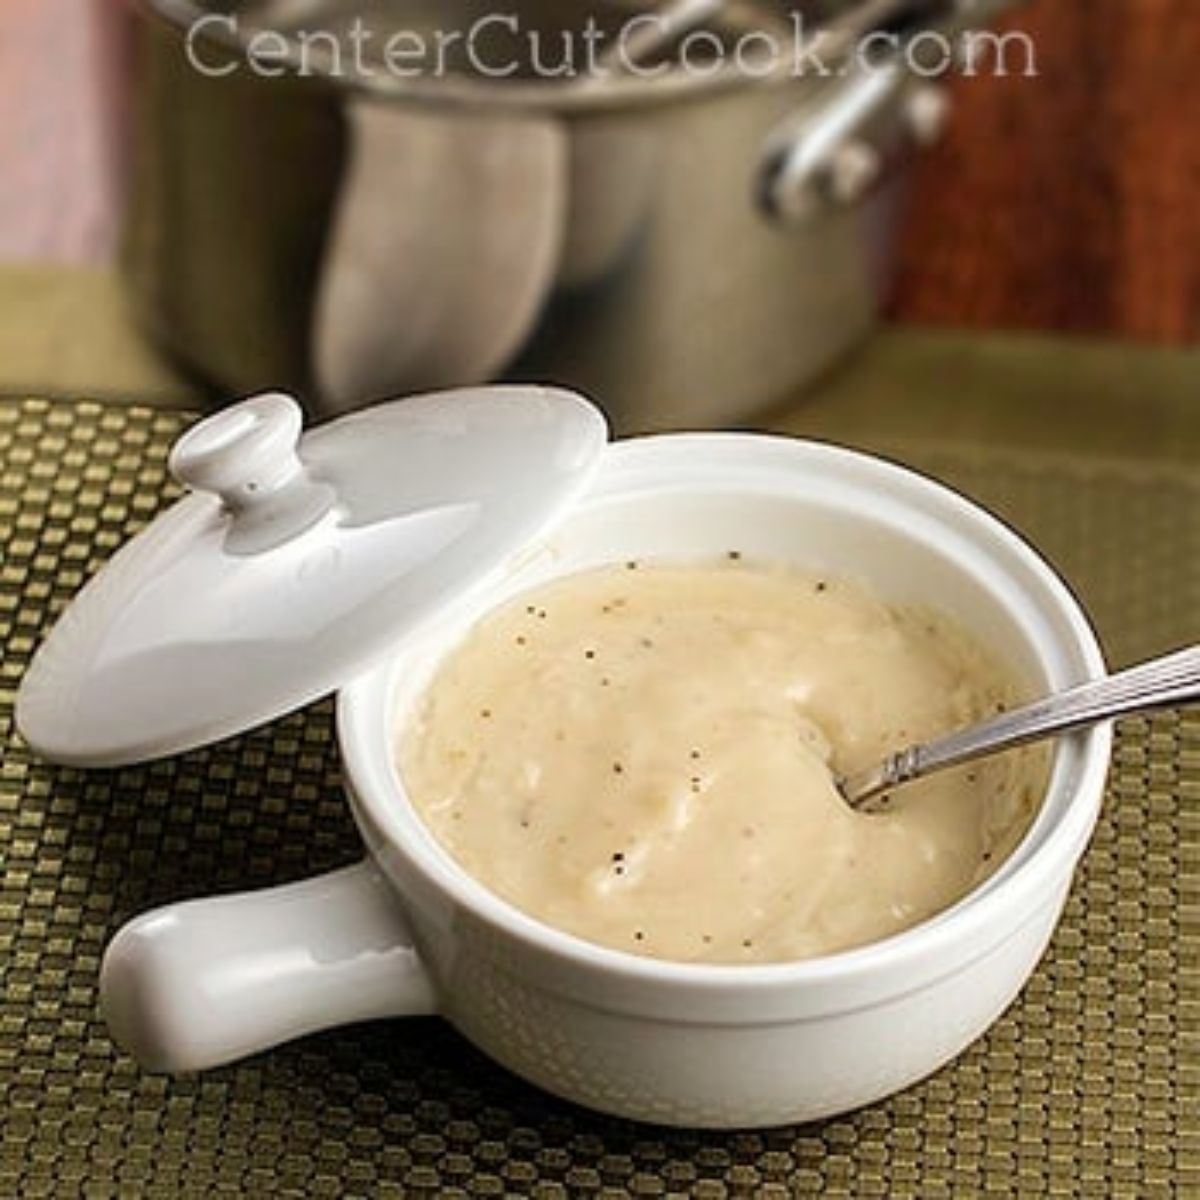 Bowl of cream soup substitute with spoon and lid